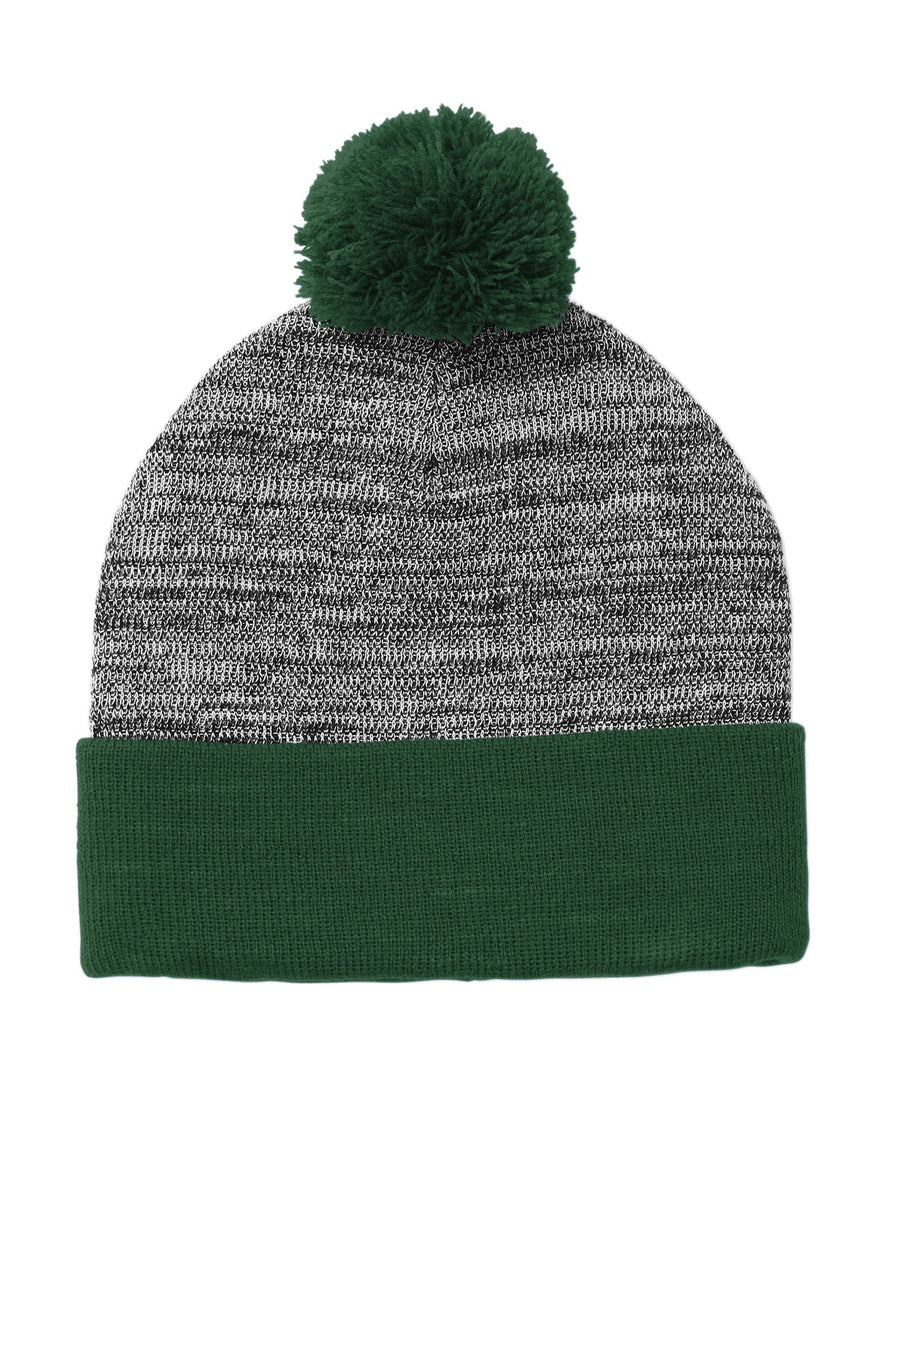 STC41-Forest Green/ Grey Heather-front_flat